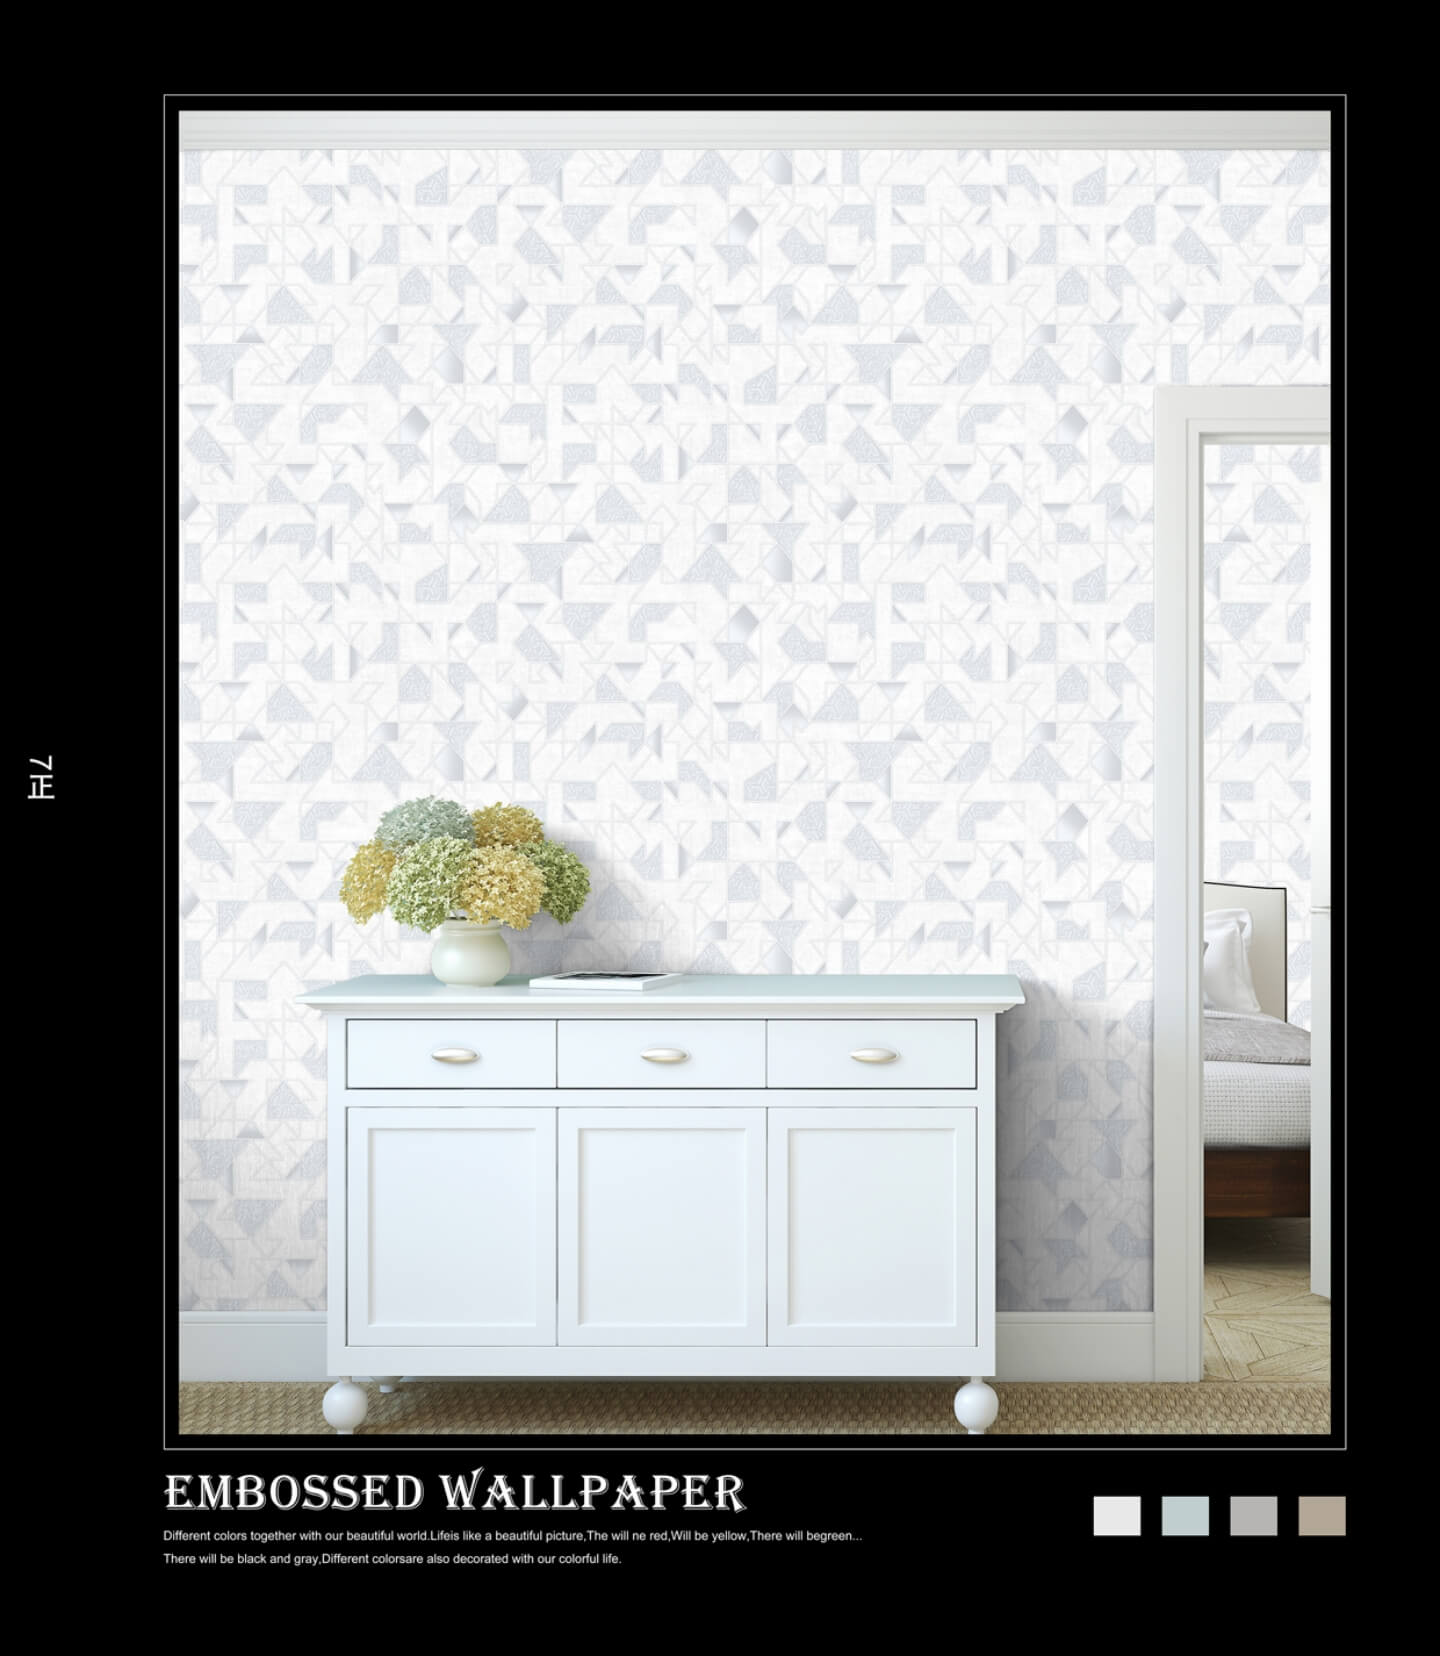 Multicolor Non-Adhesive 3D Designer Wallpaper Suitable For Bedroom, Living Room, Office, High-Quality PVC Water-resistant Wallpapers (13)